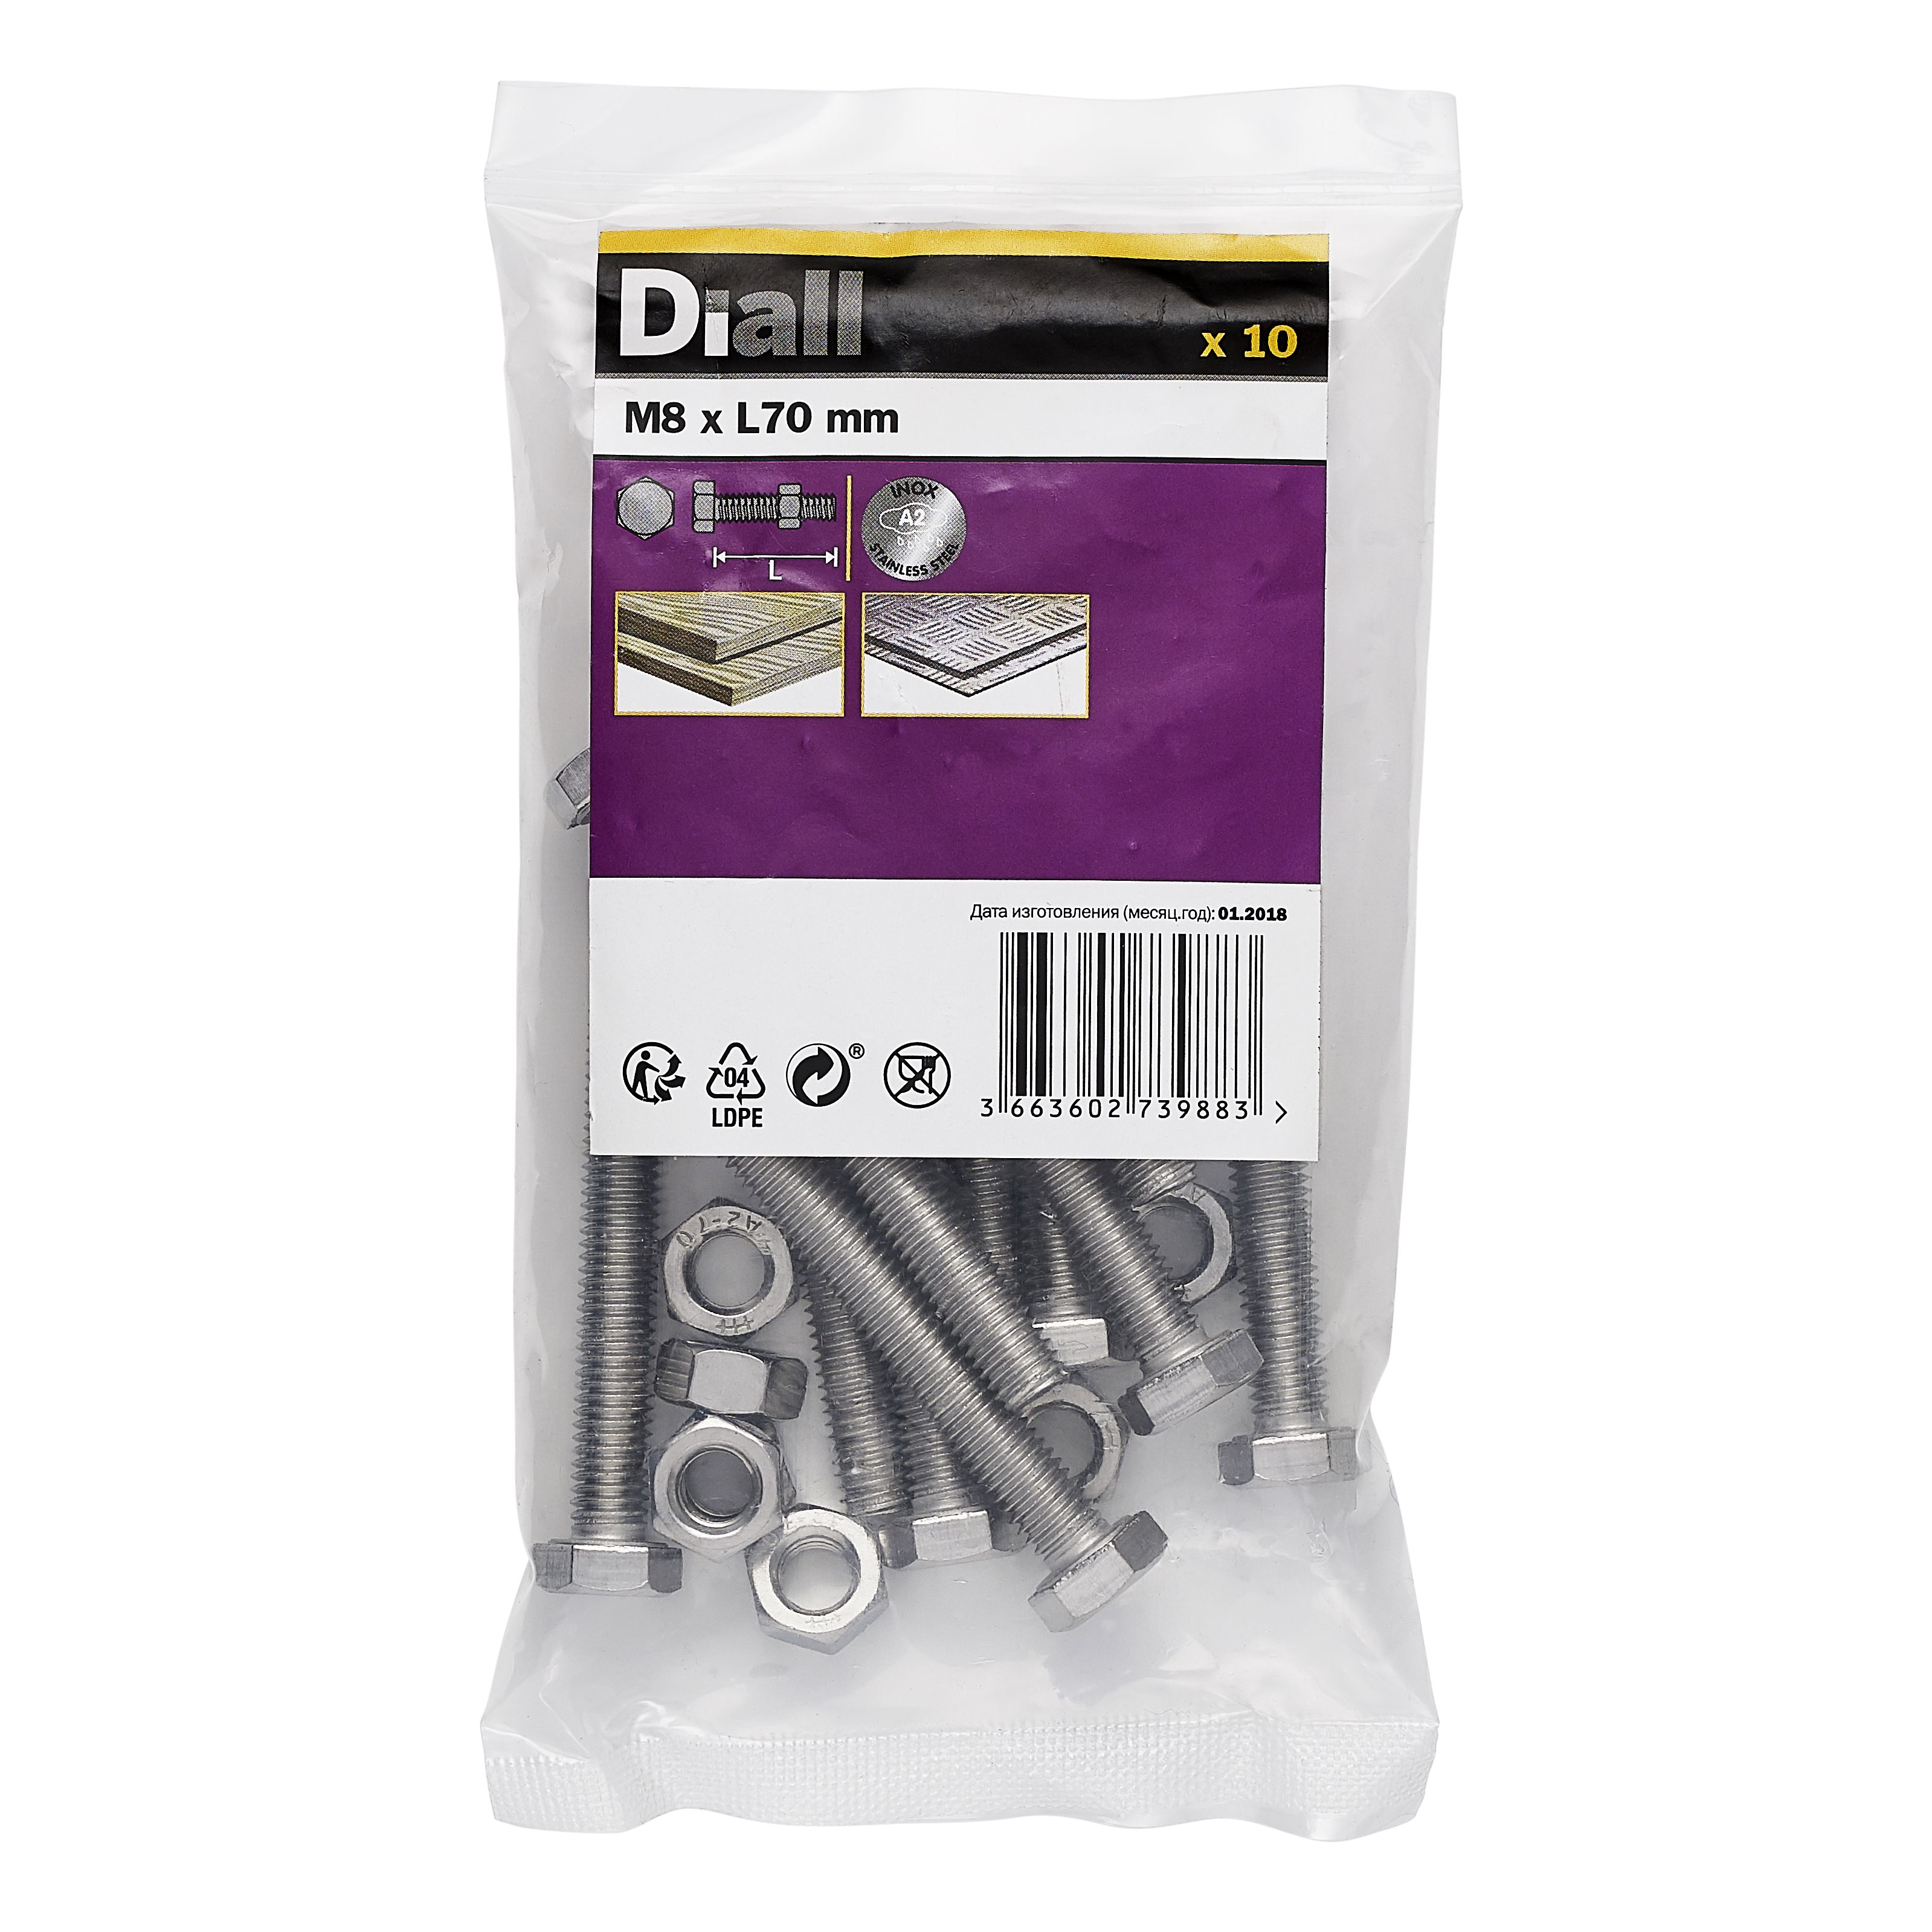 https://media.diy.com/is/image/Kingfisher/diall-m8-hex-a2-stainless-steel-bolt-nut-l-70mm-dia-8mm-pack-of-10~3663602739883_01bq?$MOB_PREV$&$width=768&$height=768